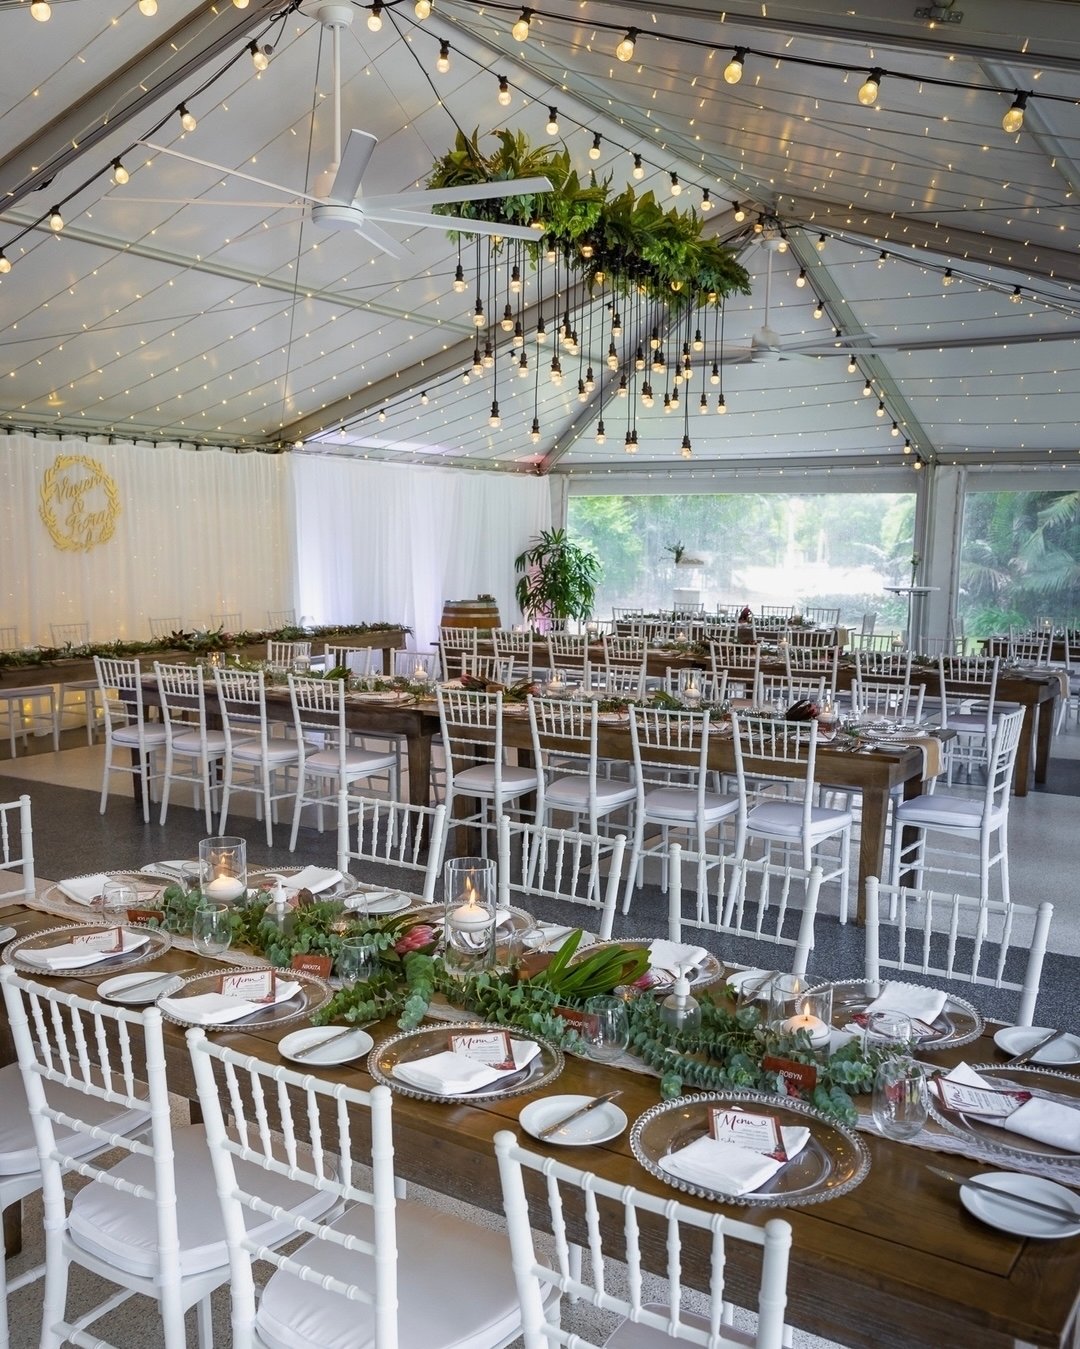 Elegant wood styling with the white high back chairs making quite an impact across the room. The fresh spinning gum added a wonderful smell of the fresh garden 
🌿 to the marquee.
.
. #inthegrove #inthegroveqld #weddingsinthegrove #weddinginspo #wedd